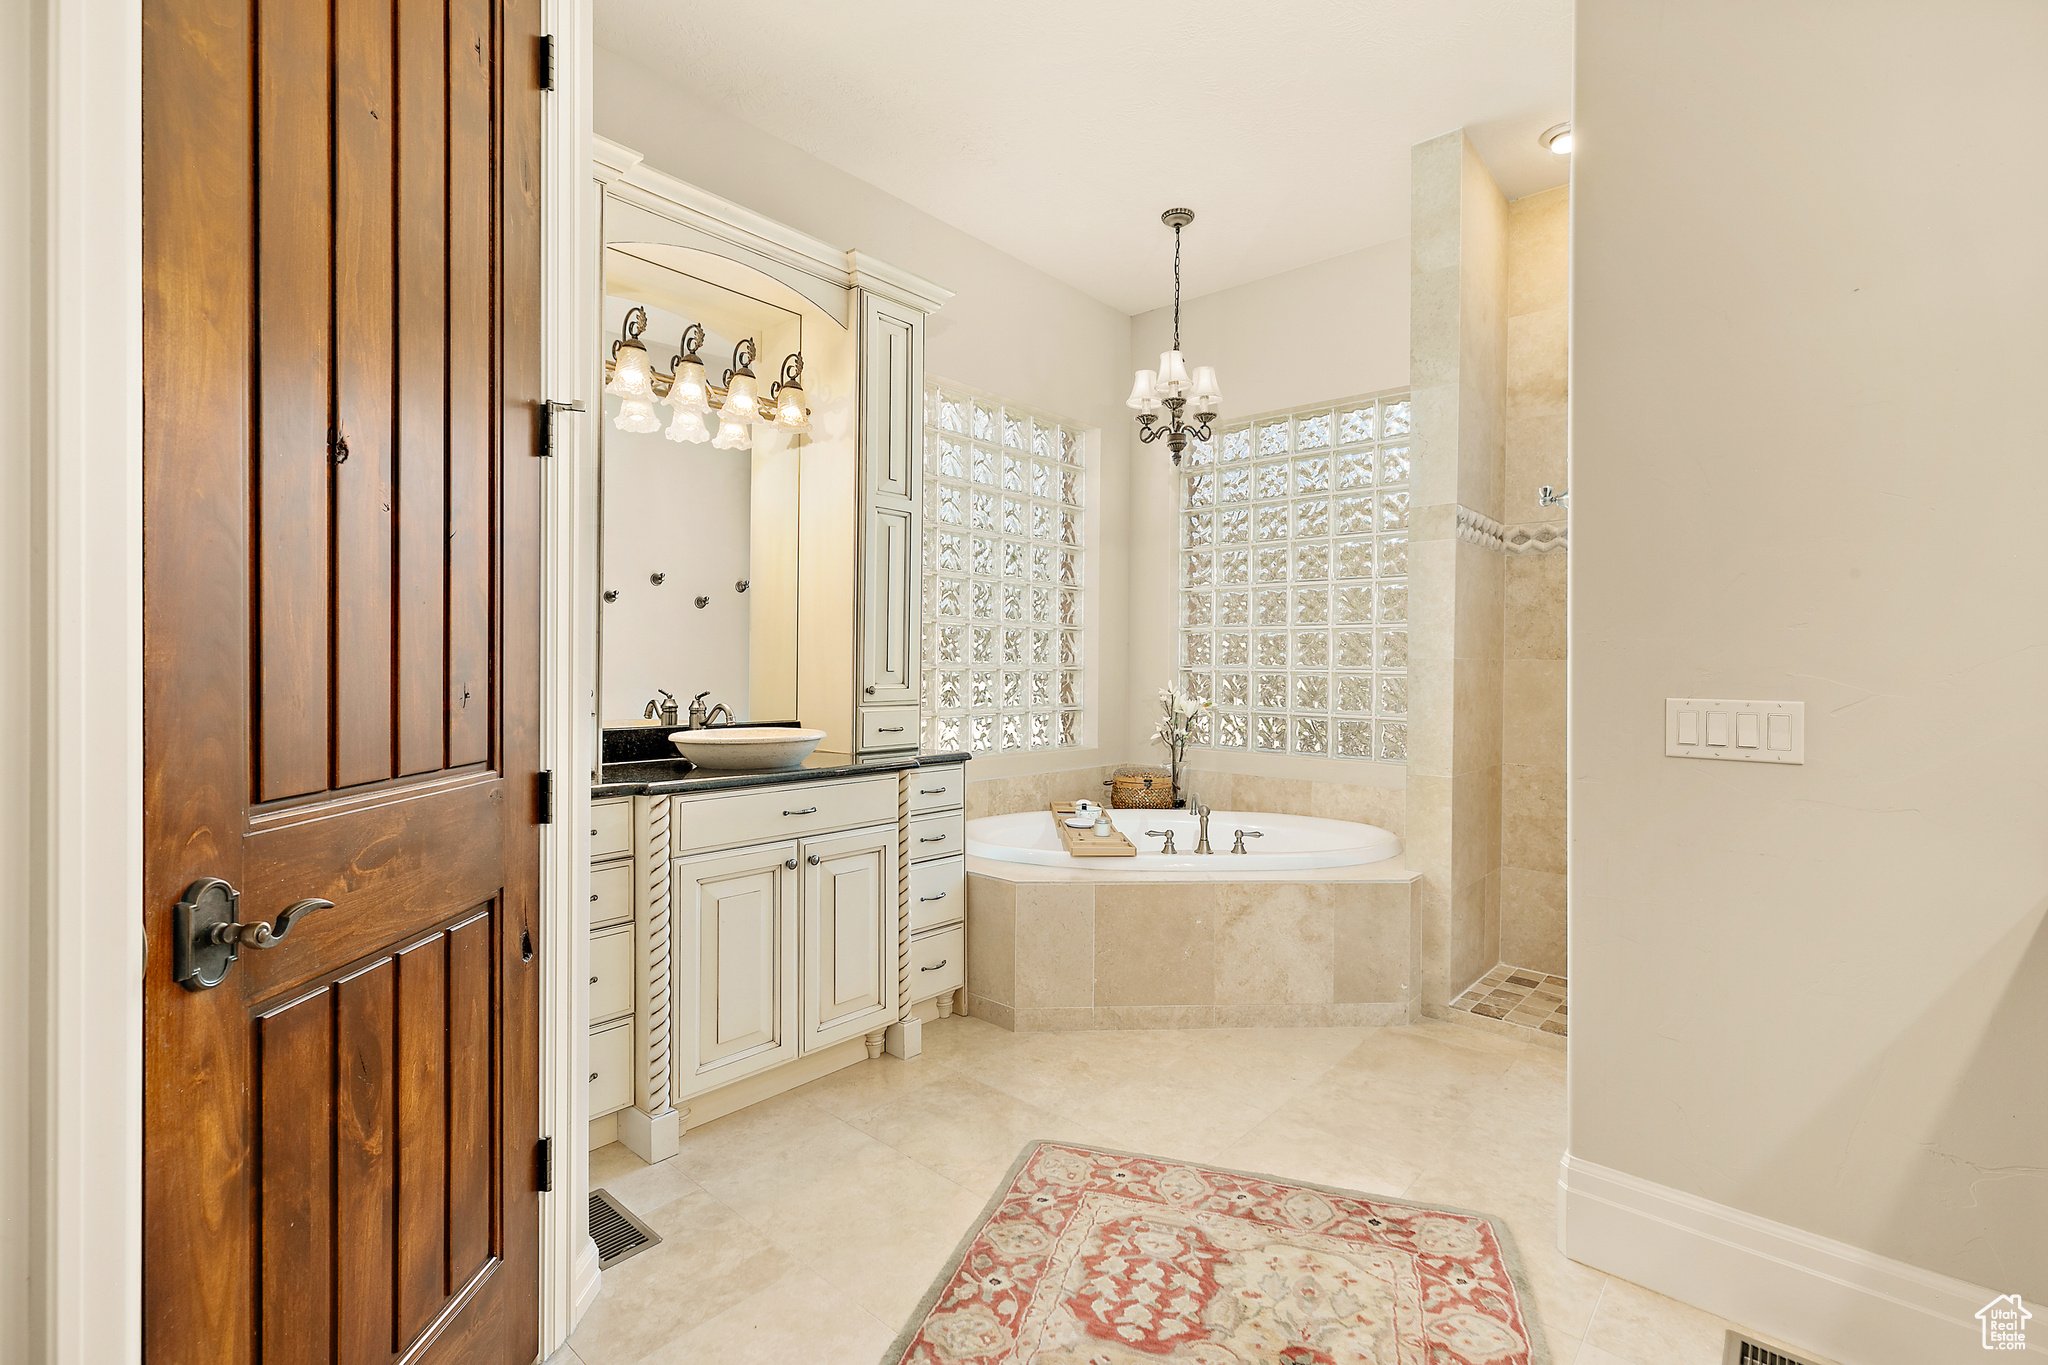 Bathroom with a relaxing tiled bath, tile floors, vanity, and a notable chandelier